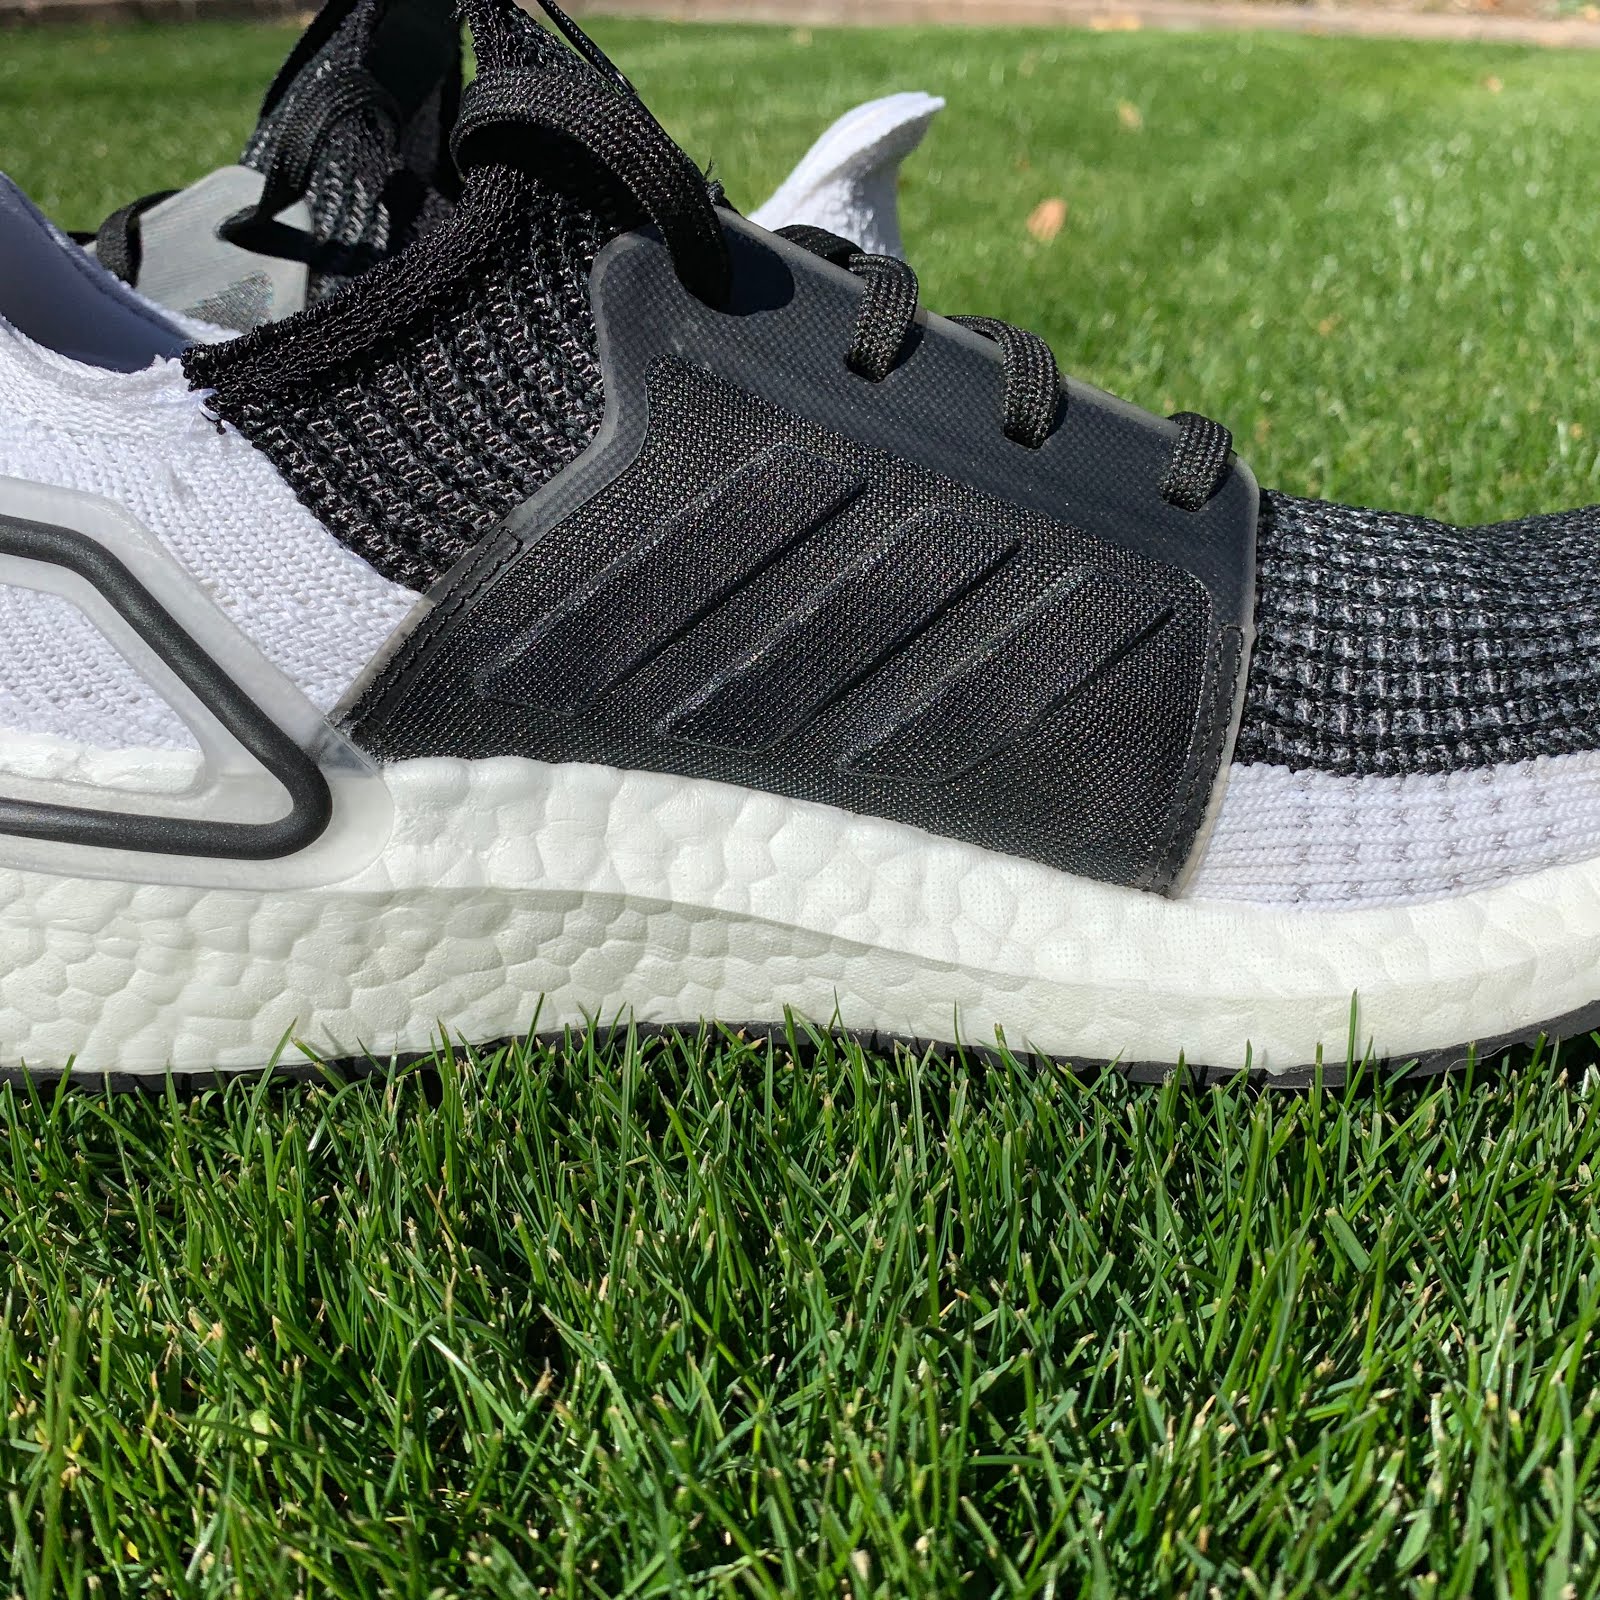 Road Trail adidas Boost 19 Review - Yes Virginia, finally a real running shoe!